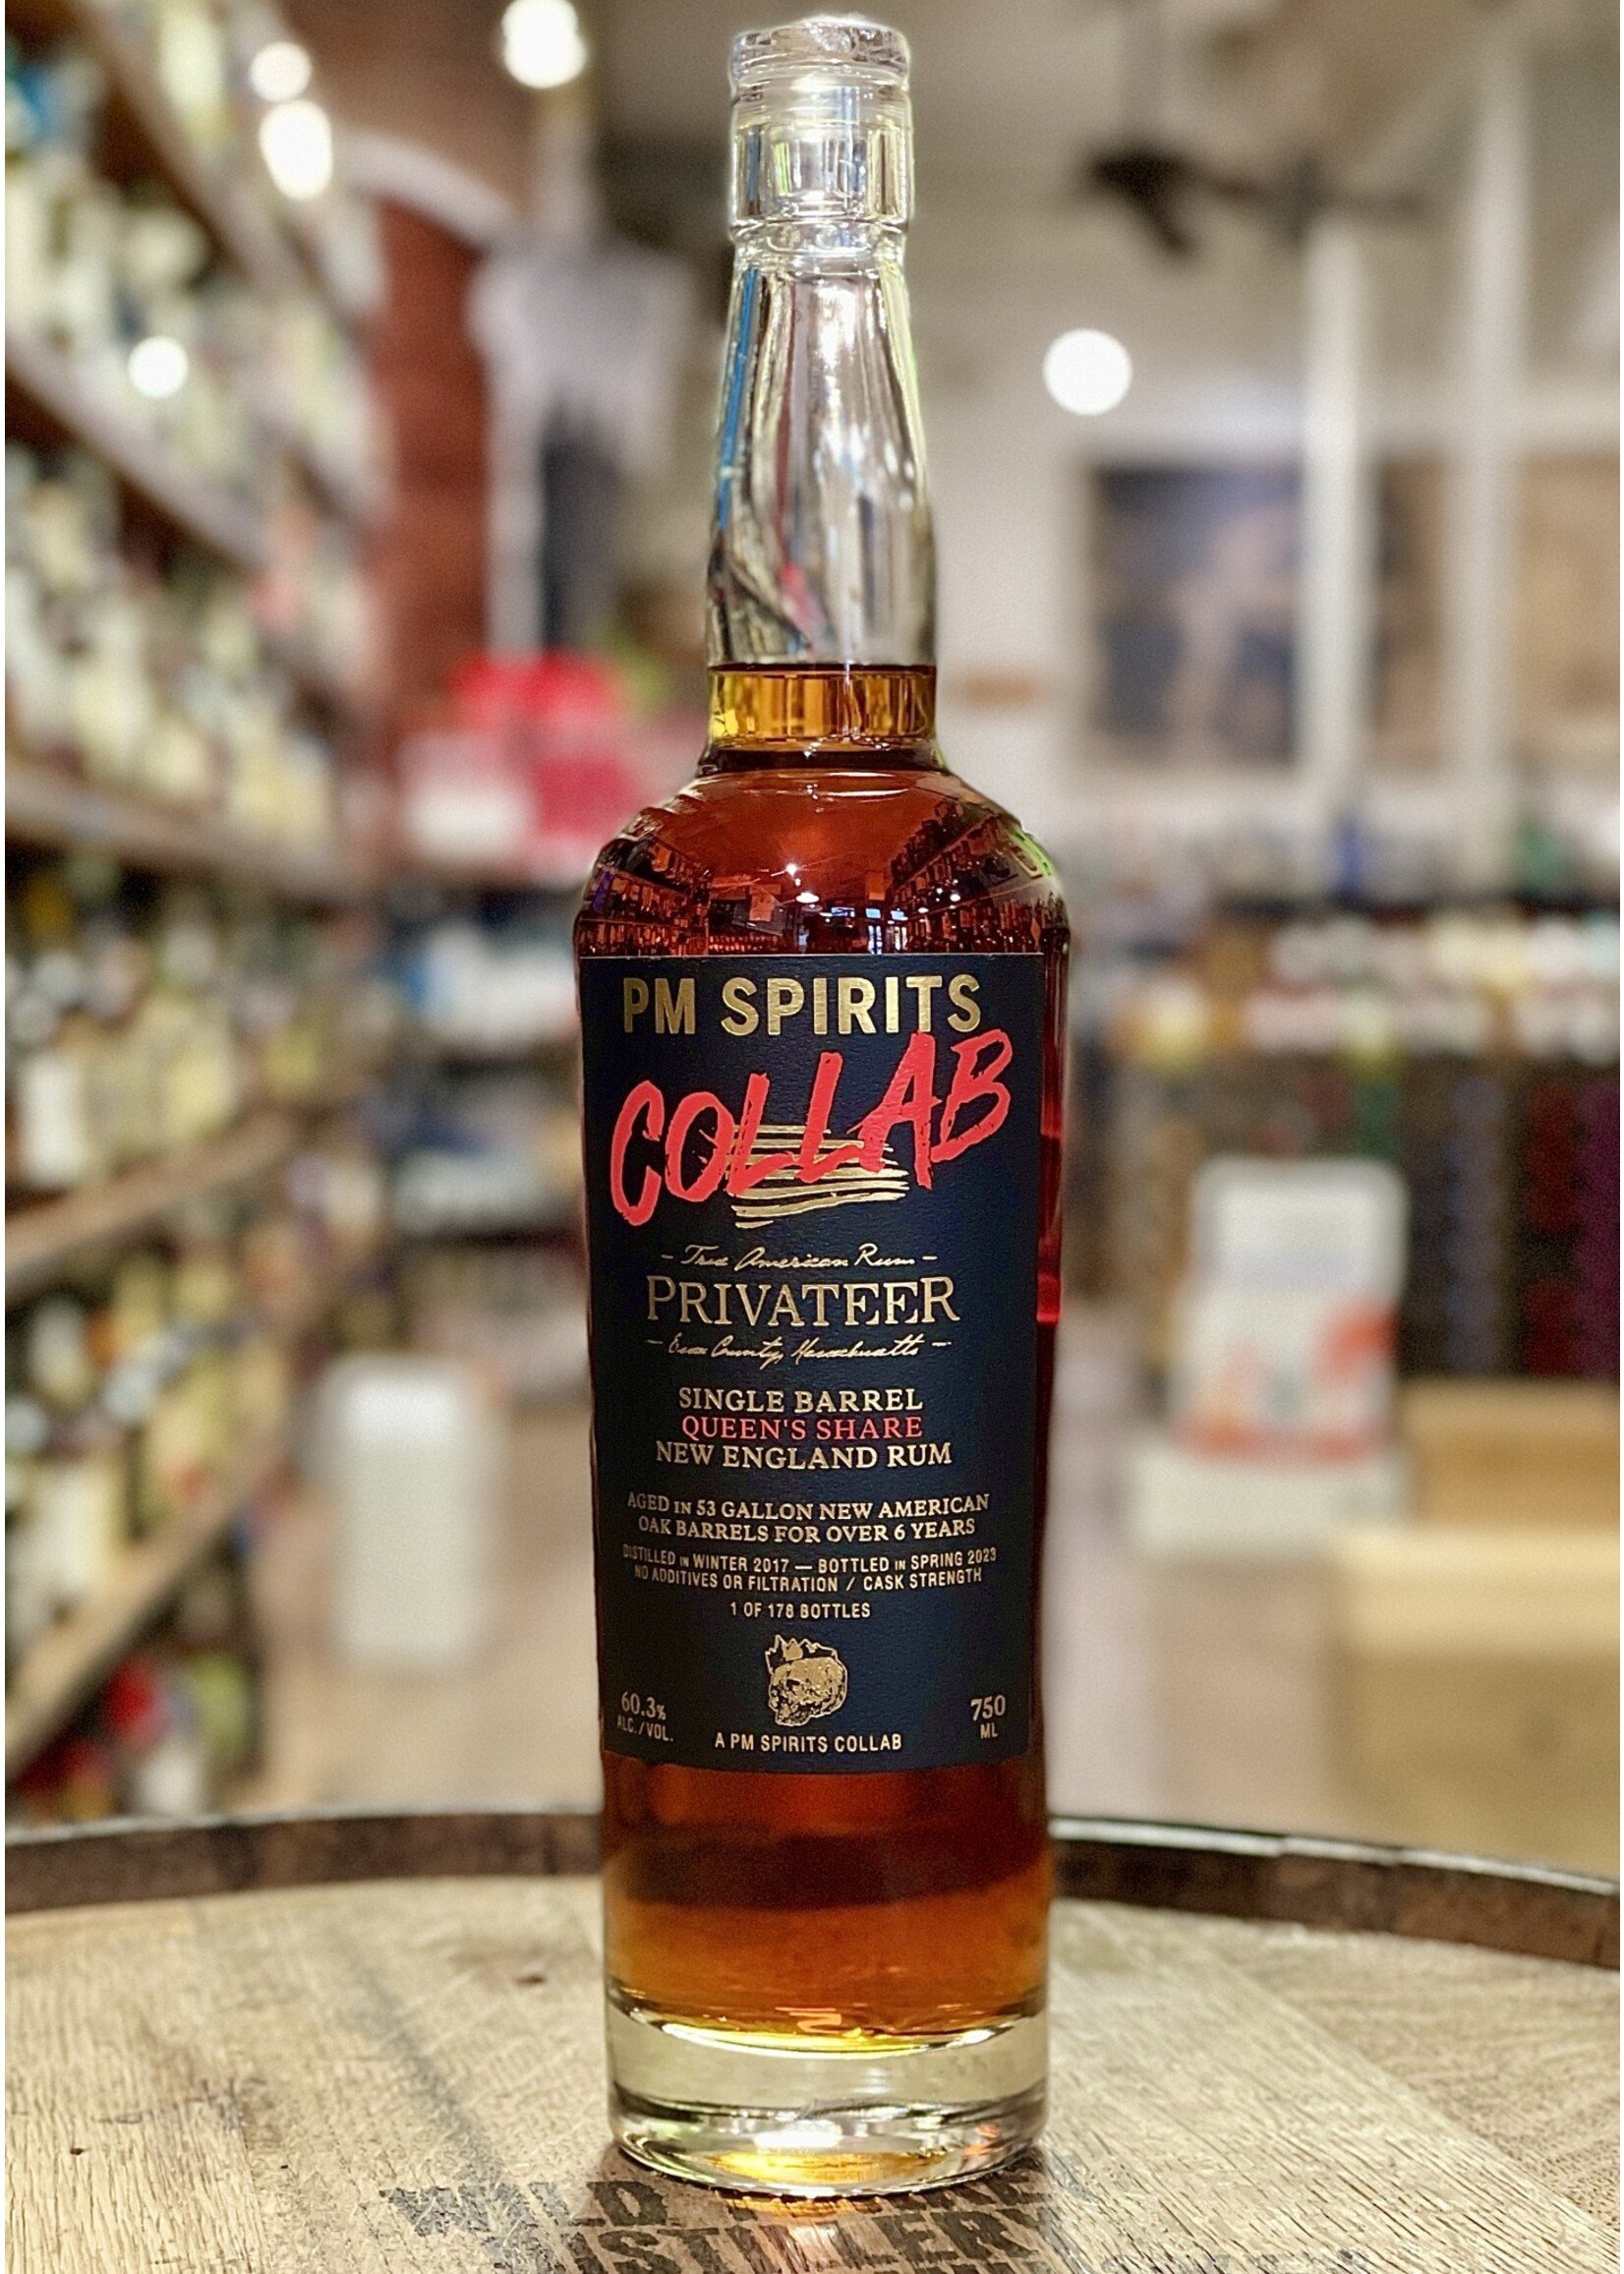 Privateer Privateer / PM Spirits Collab Queen’s Share 6 Year Single Barrel New England Rum 60.3% abv / 750mL